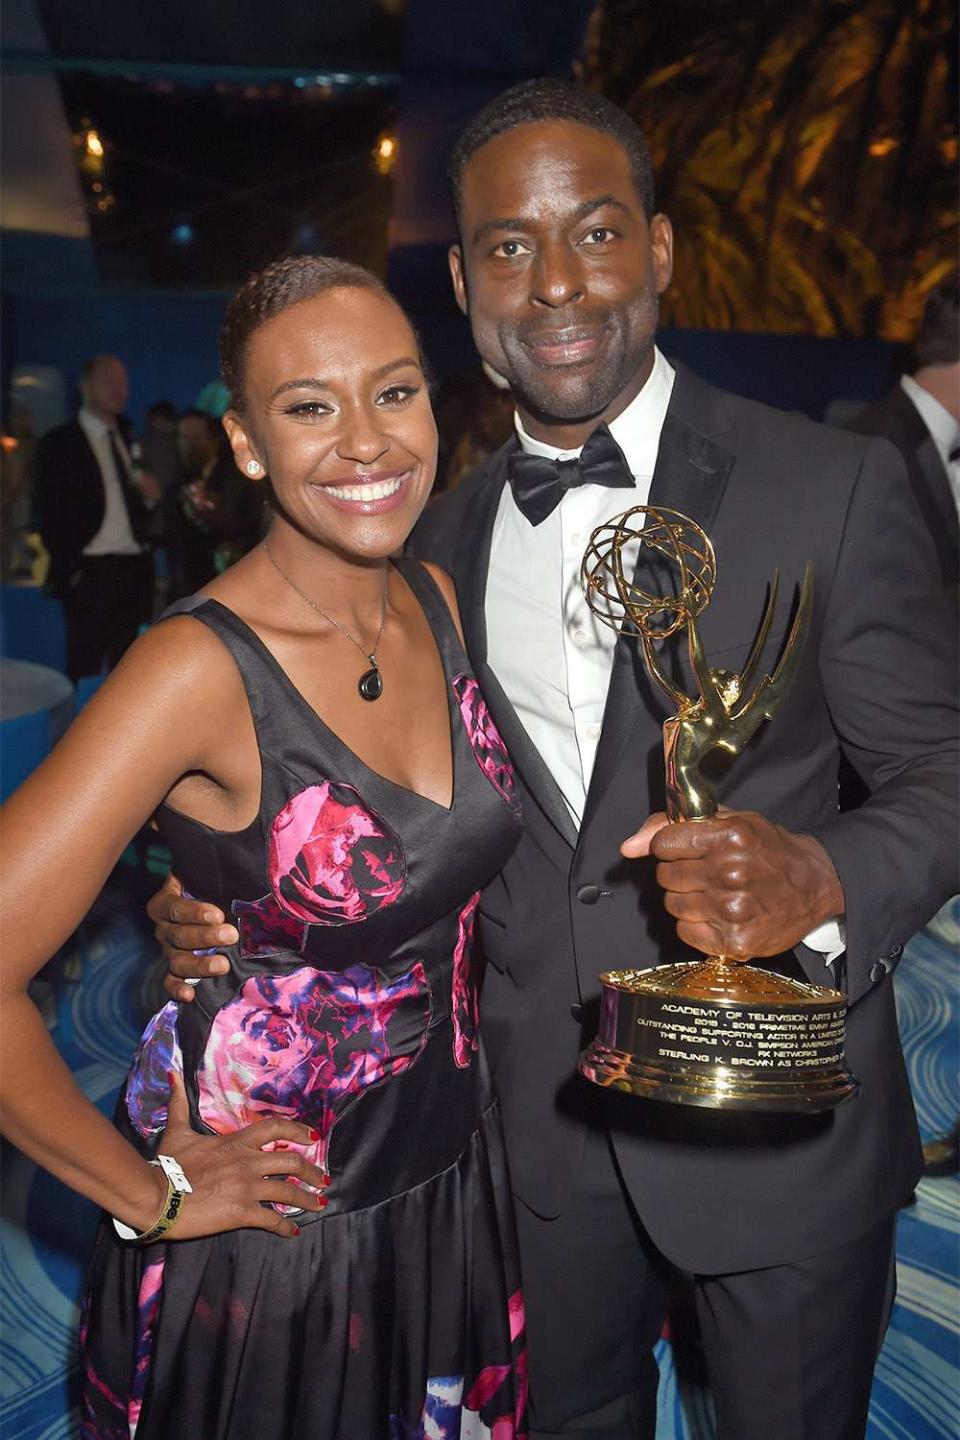 LOS ANGELES, CA - SEPTEMBER 18: Actors Ryan Michelle Bathe (L) and Sterling K. Brown attend HBO's Official 2016 Emmy After Party at The Plaza at the Pacific Design Center on September 18, 2016 in Los Angeles, California. (Photo by Jeff Kravitz/FilmMagic)